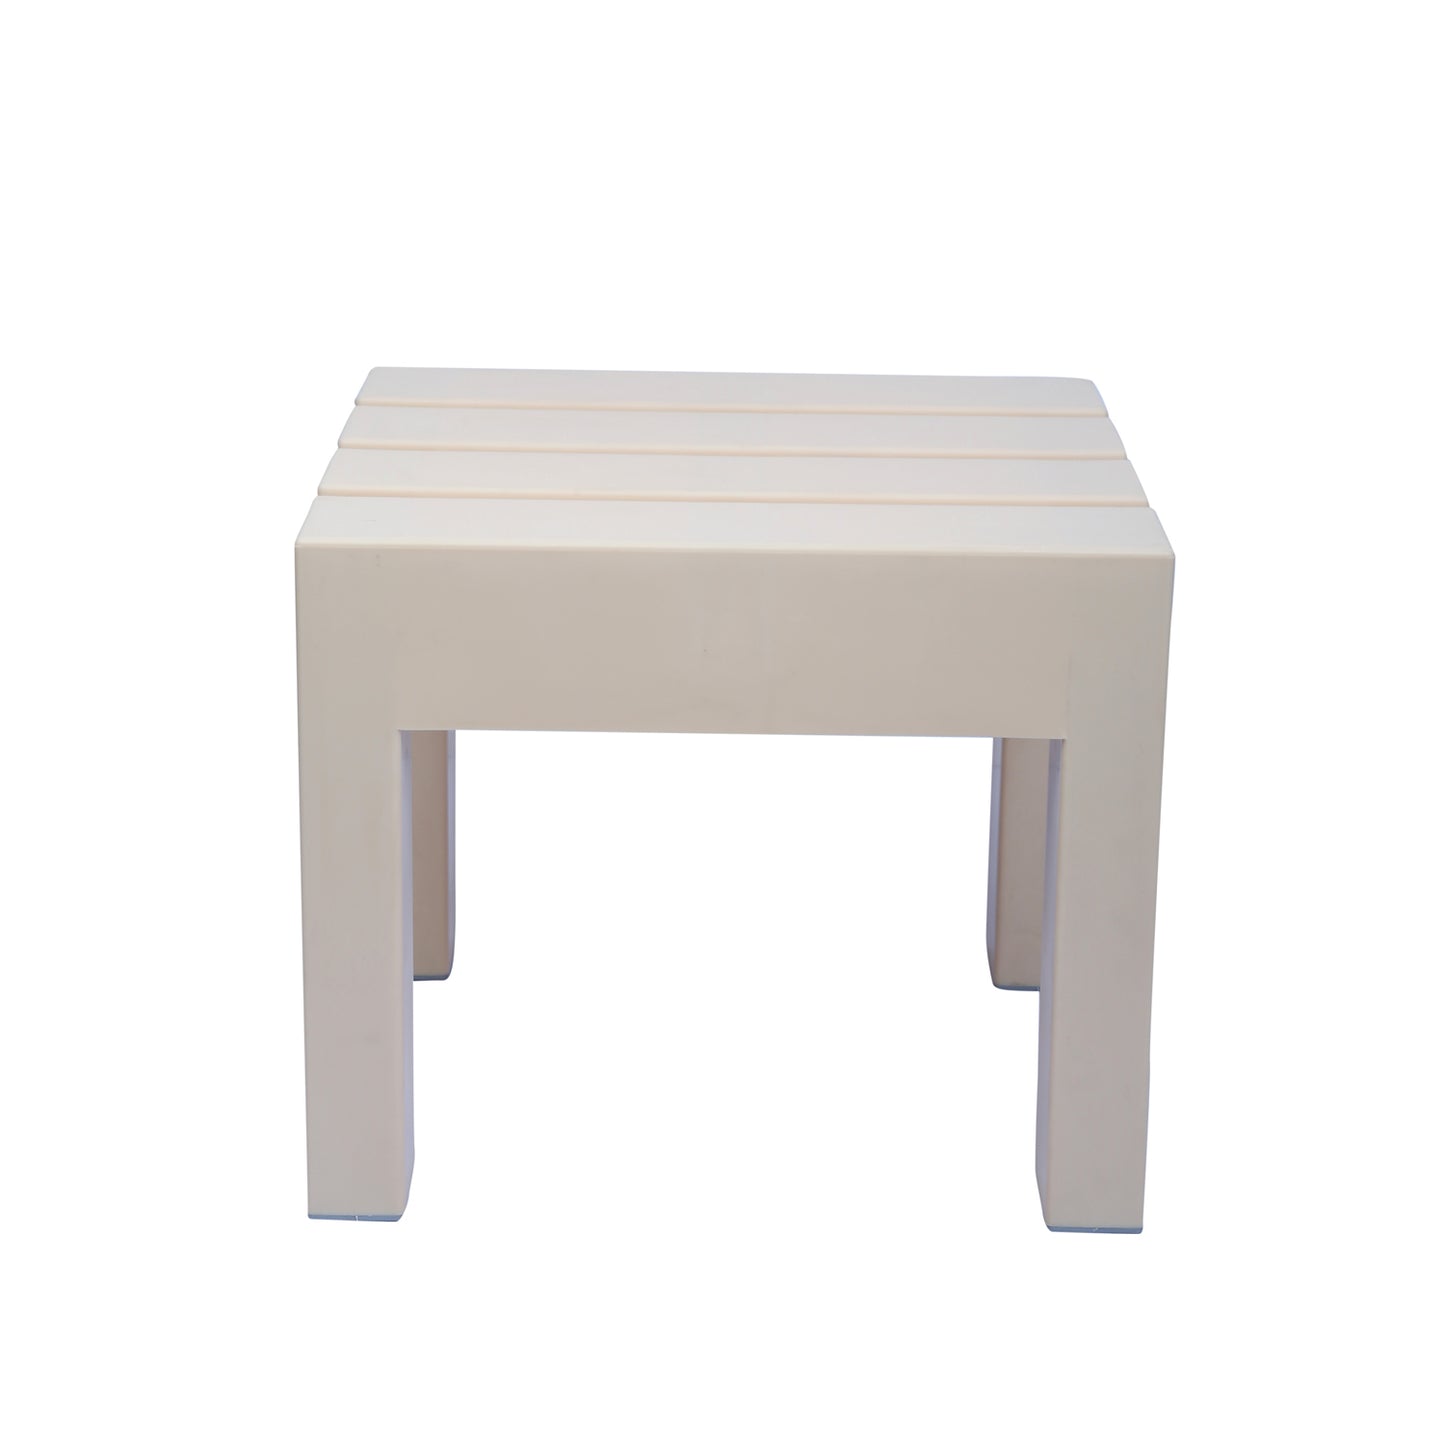 Aesthetic Square Multipurpose Bench|Furniture by Sam Home Collection